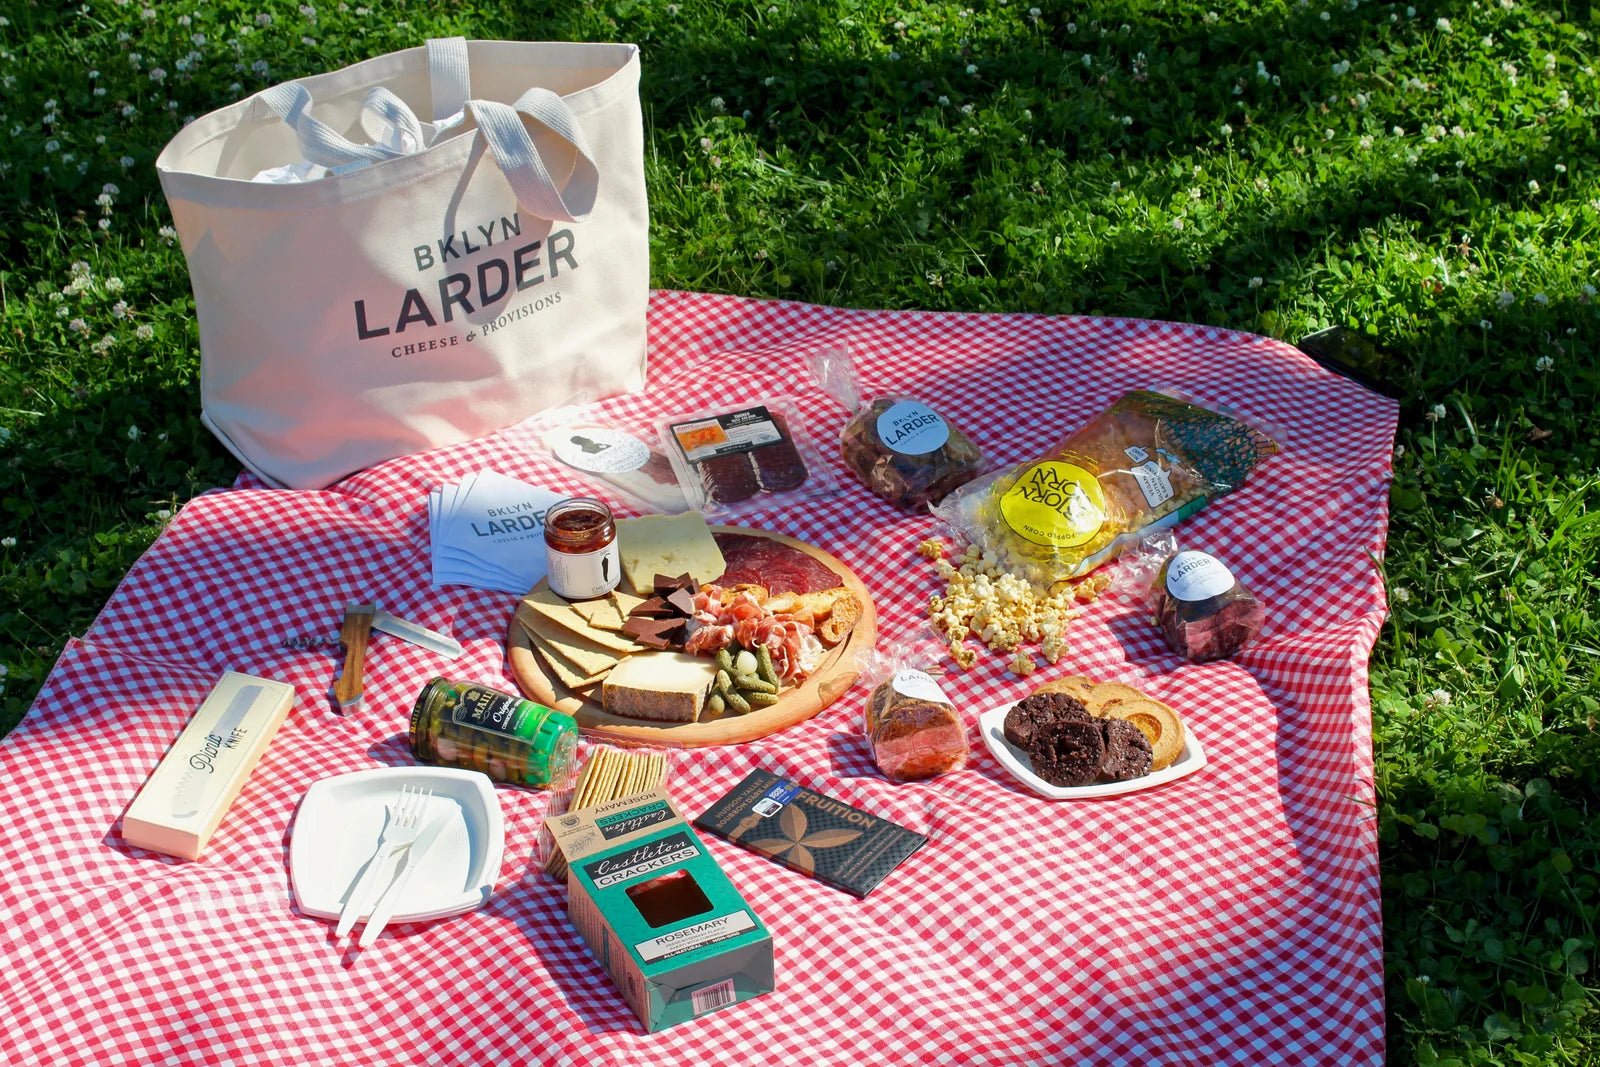 What to Bring to the Best Picnic Spots in Brooklyn - BKLYN Larder